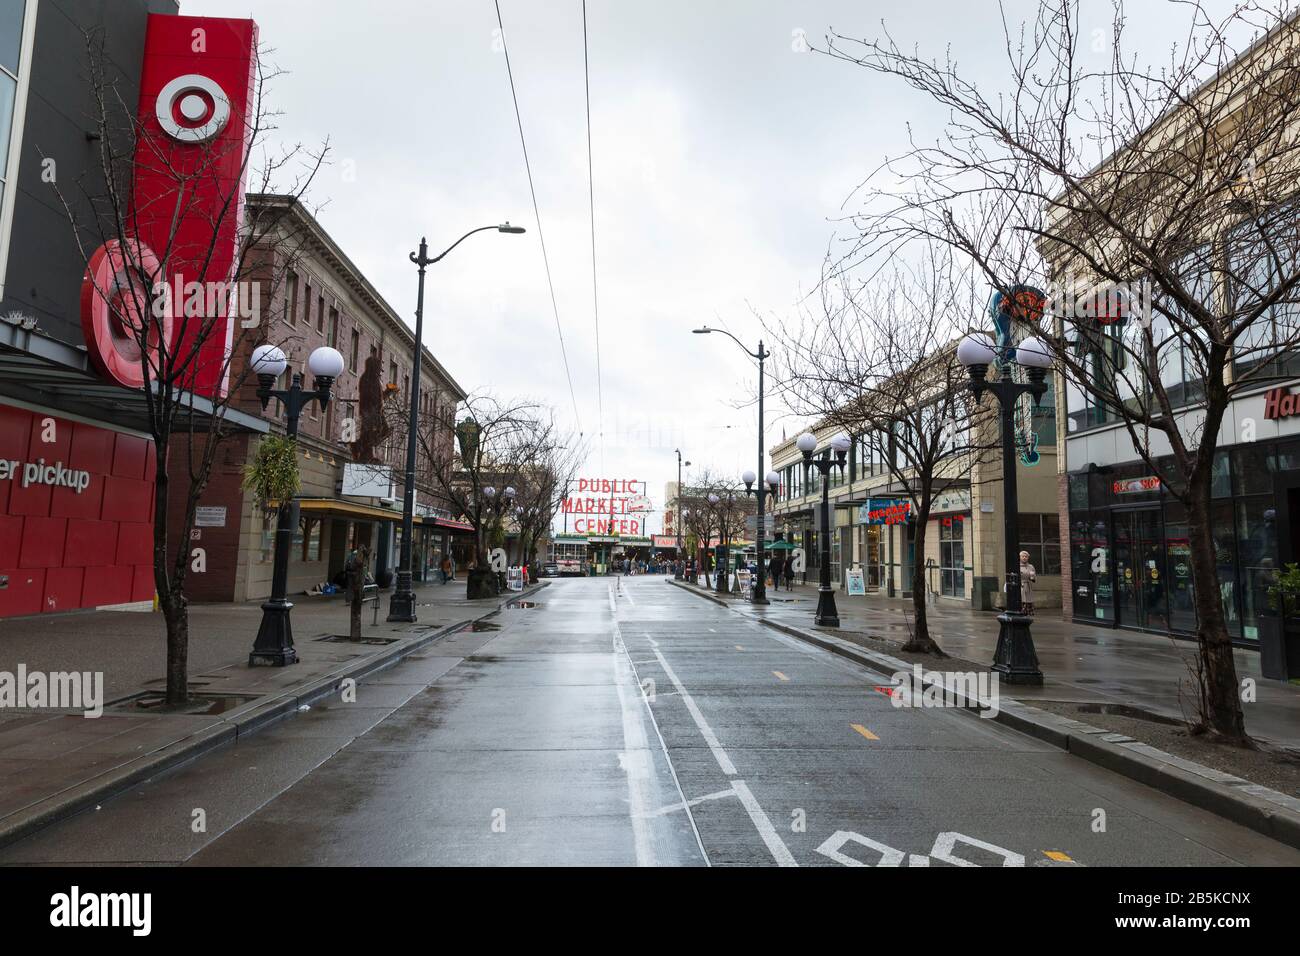 Pike Street remains quiet on Sunday, March 8. 2020. As the epicenter of the coronavirus outbreak in the U.S., Seattle area business struggle while work and travel restrictions continue to impact the local economy. Stock Photo